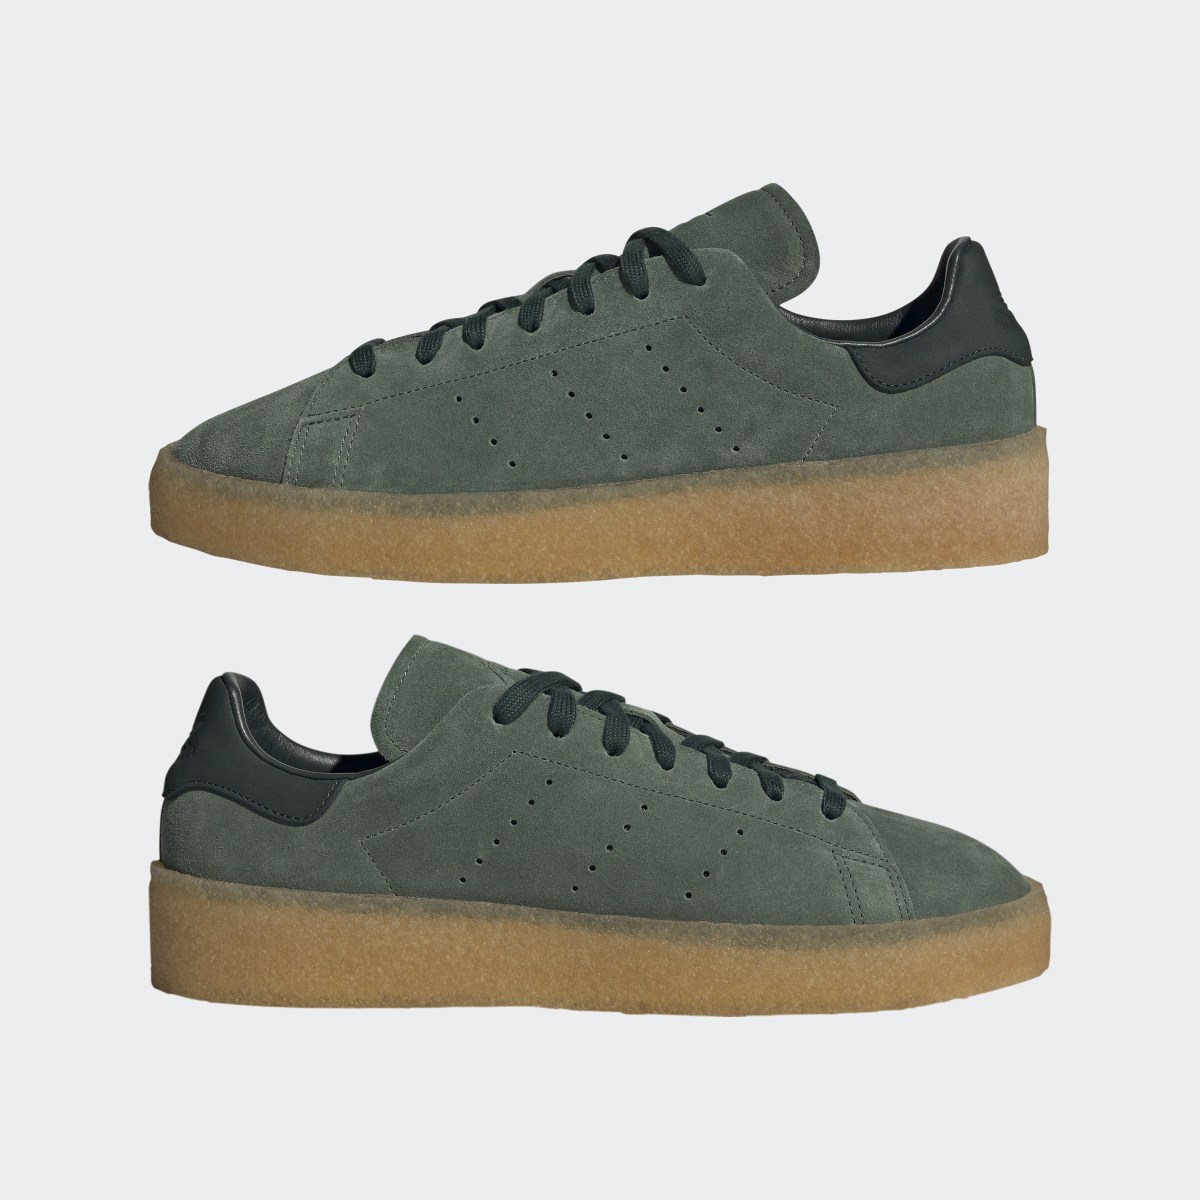 Adidas Stan Smith Crepe Shoes. 8